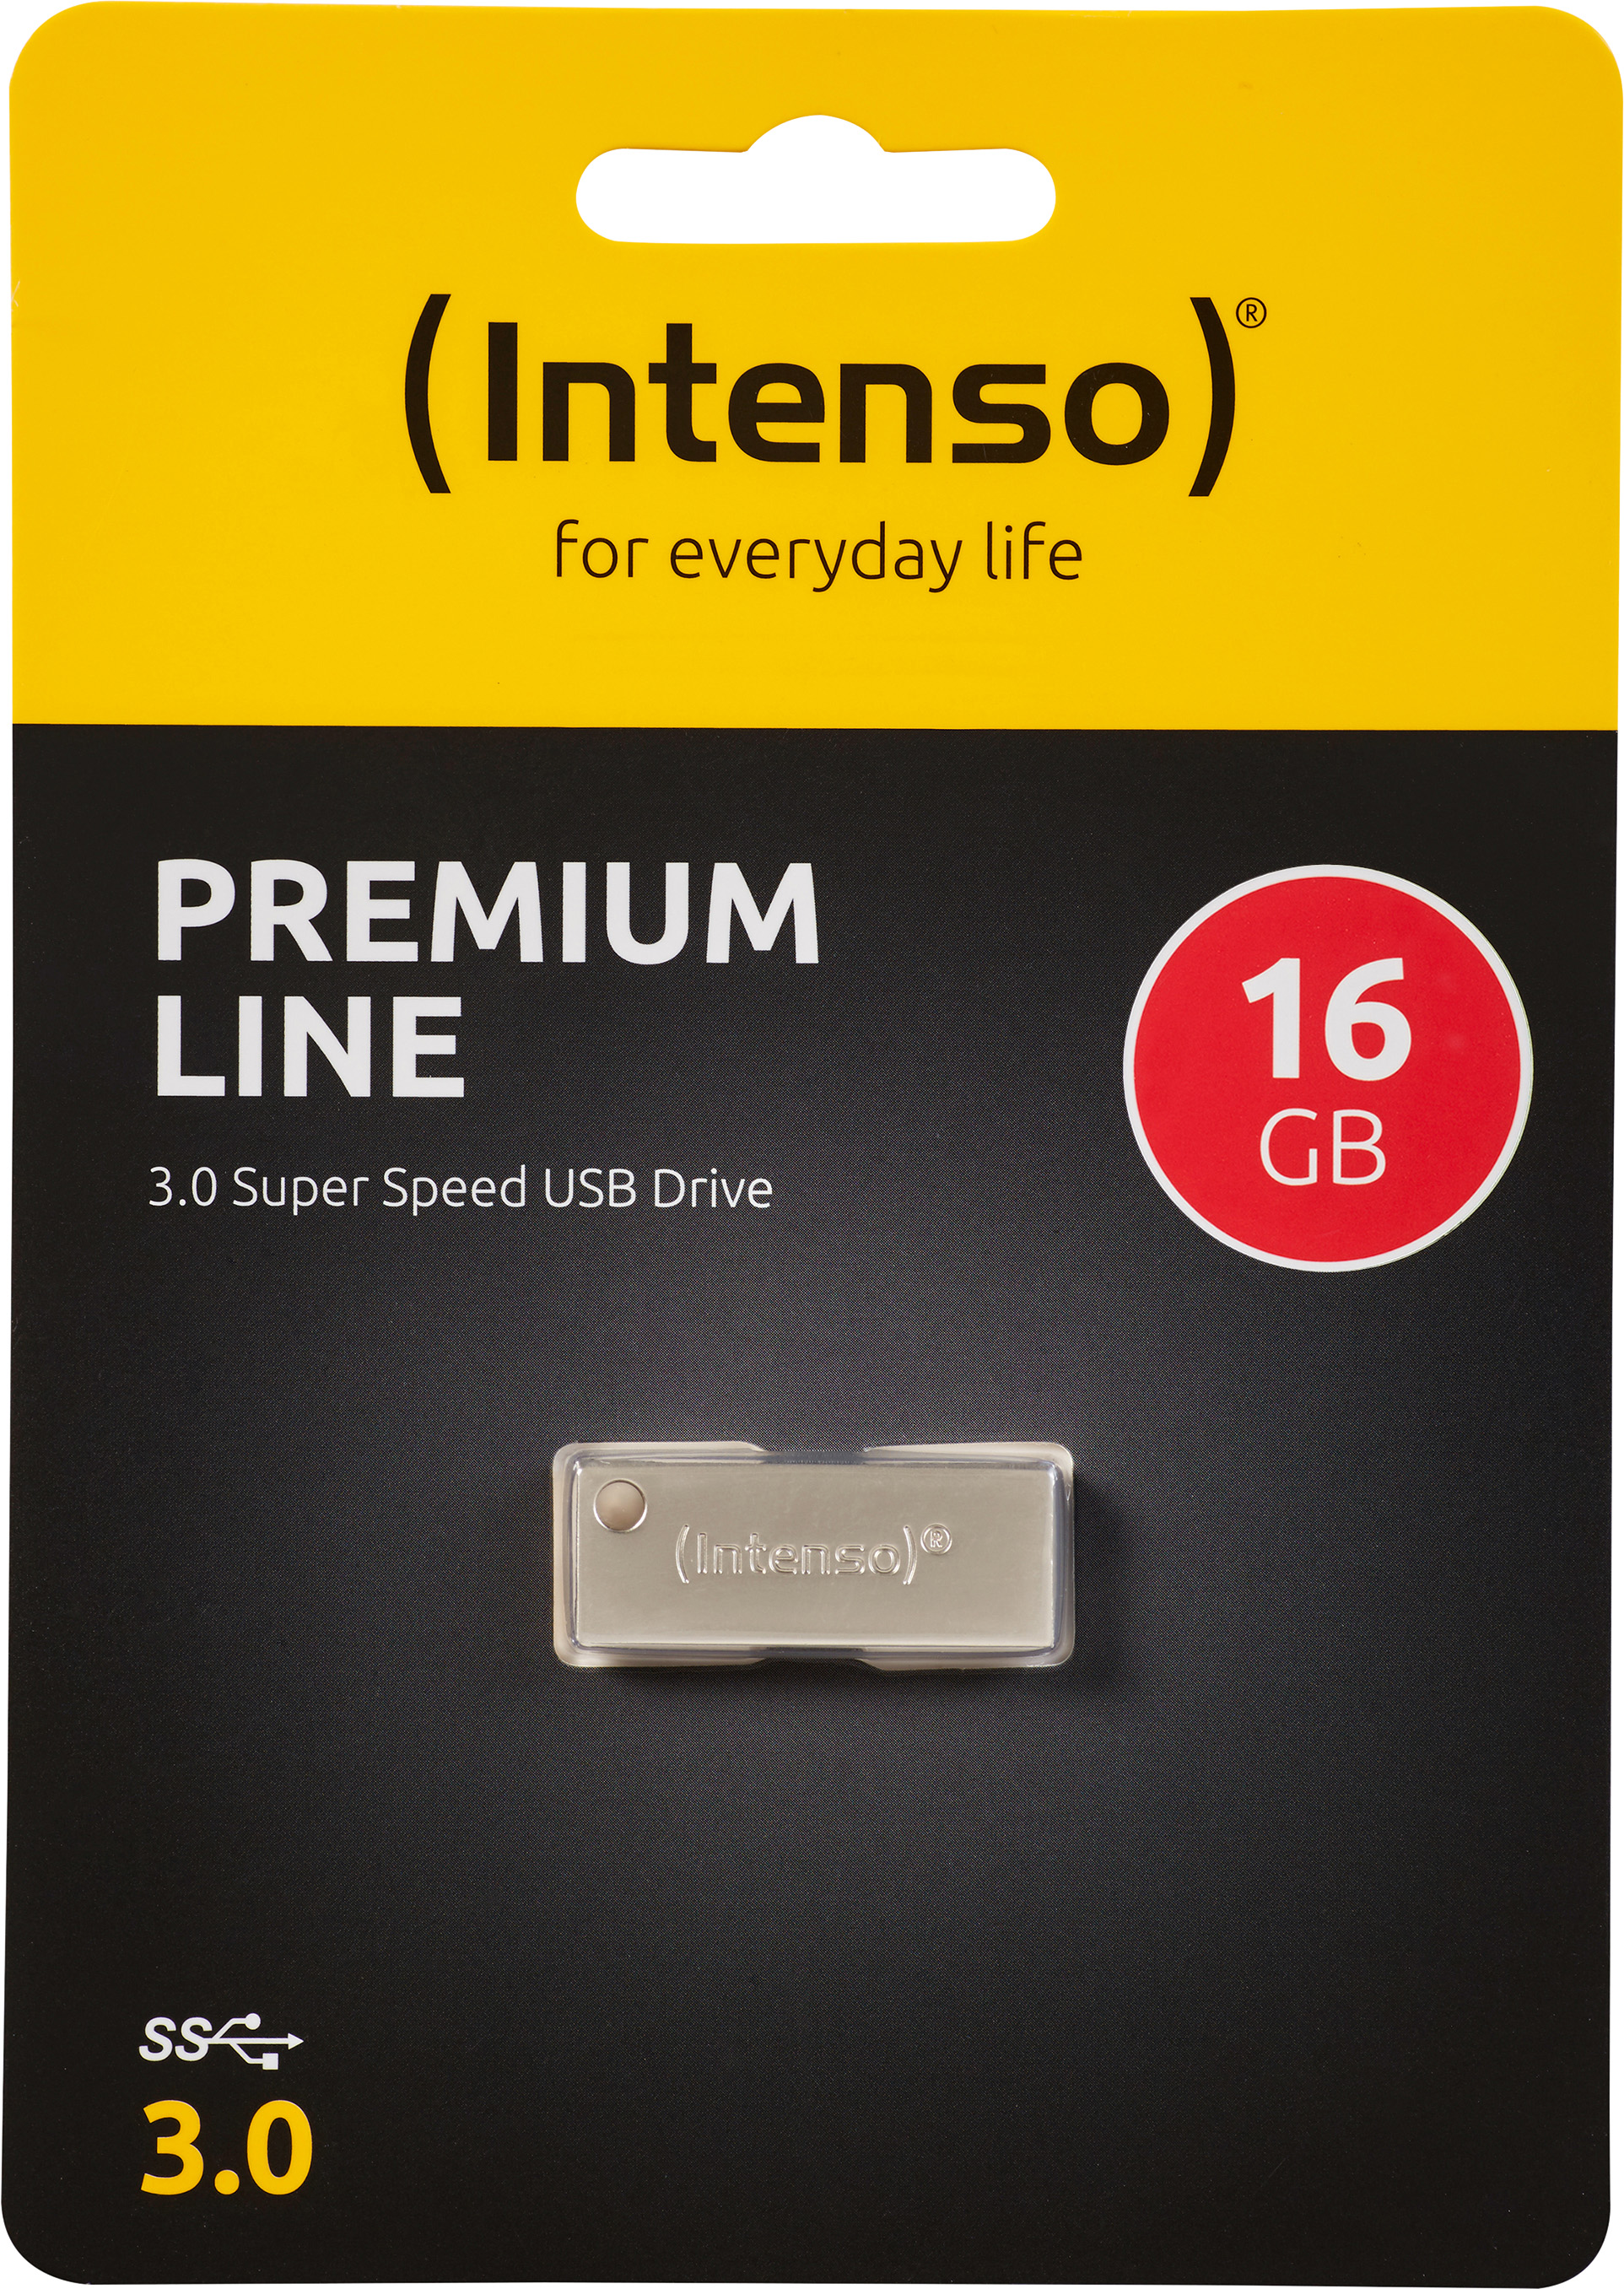 Intenso USB 3.0 Stick 16GB, Premium Line, Metall, silber Typ-A, (R) 100MB/s, Retail-Blister